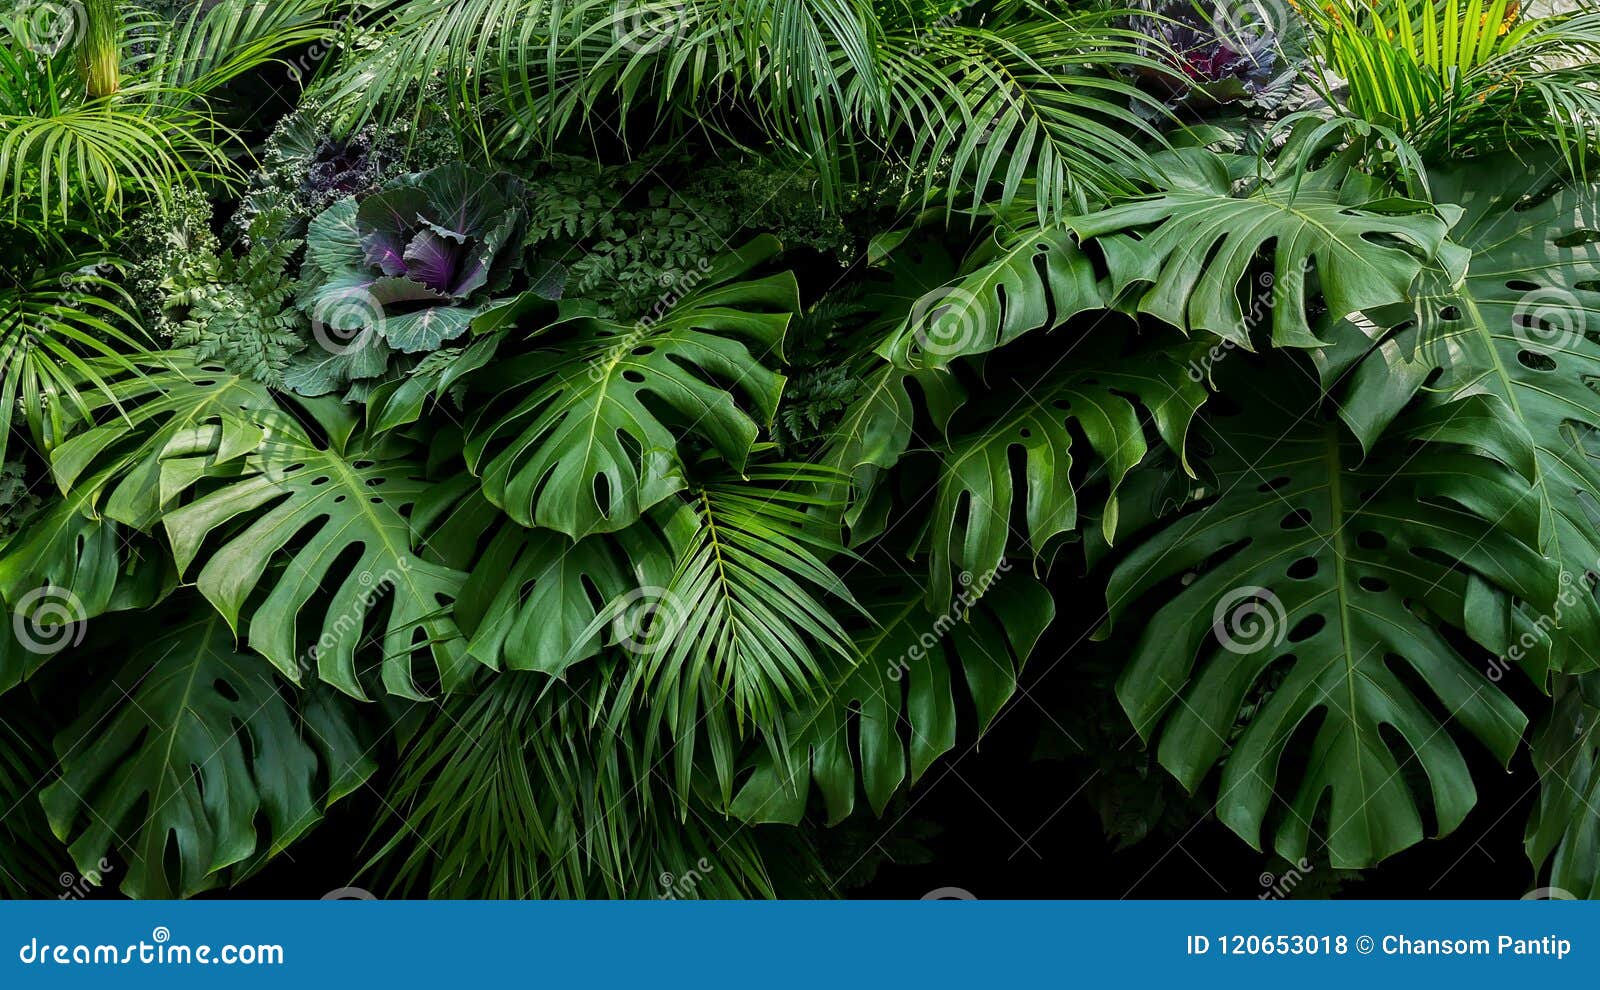 green tropical leaves of monstera, fern, and palm fronds the rainforest foliage plant bush floral arrangement on dark